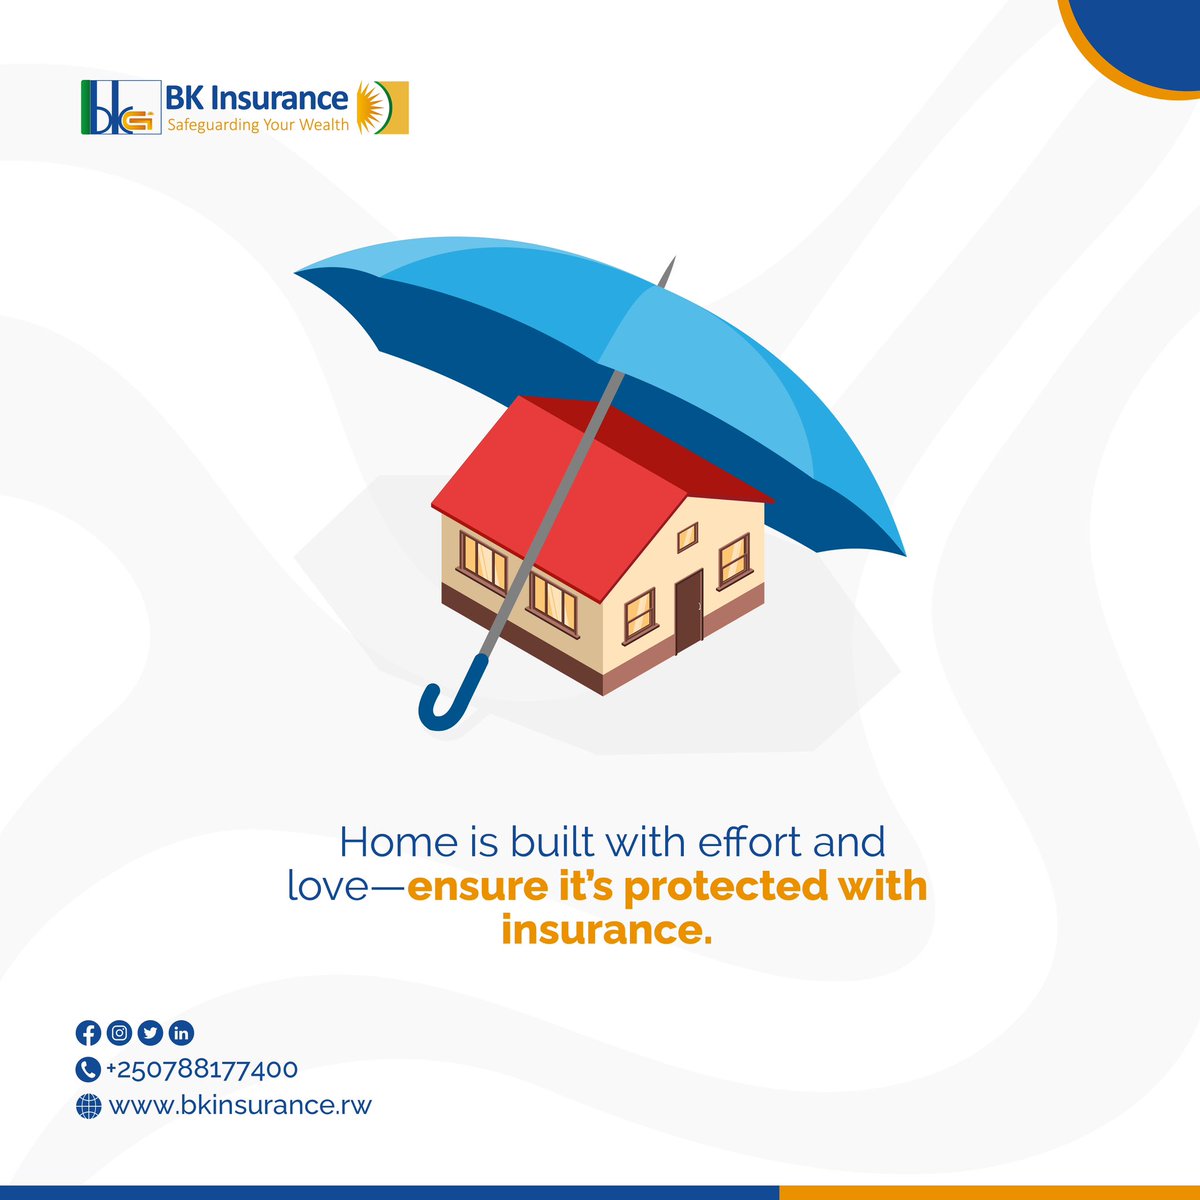 BK Insurance’s home insurance takes care of your home and what is inside it, protect your safe space by getting it today! #BKInsurance #SafeGuardingYourWealth #RwoX #Rwot